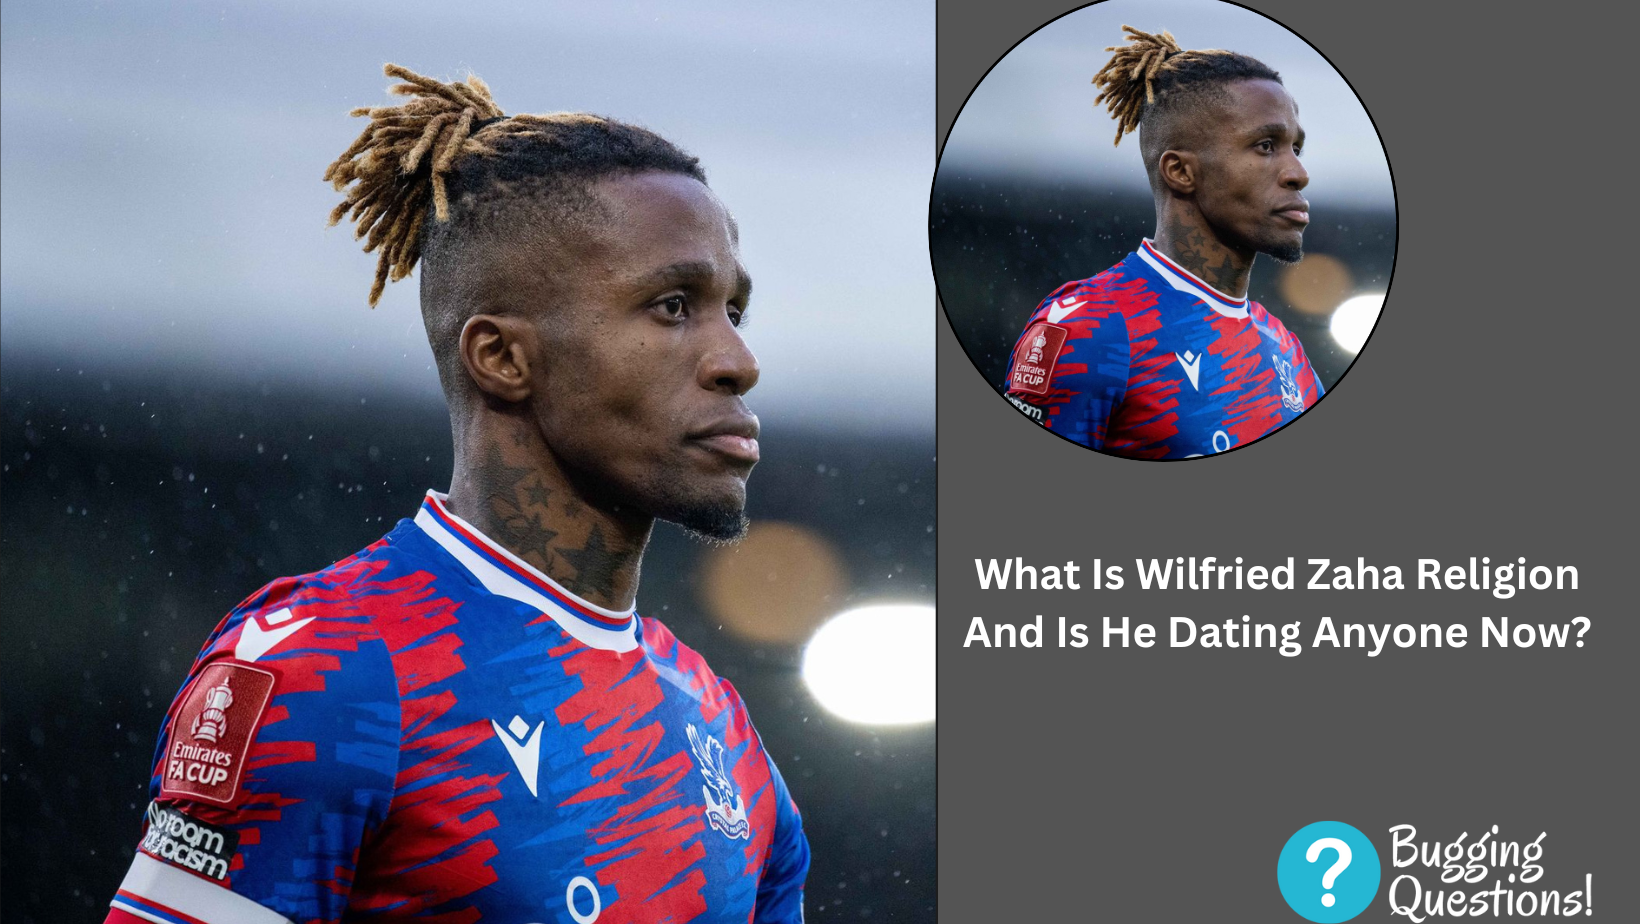 What Is Wilfried Zaha Religion And Is He Dating Anyone Now?